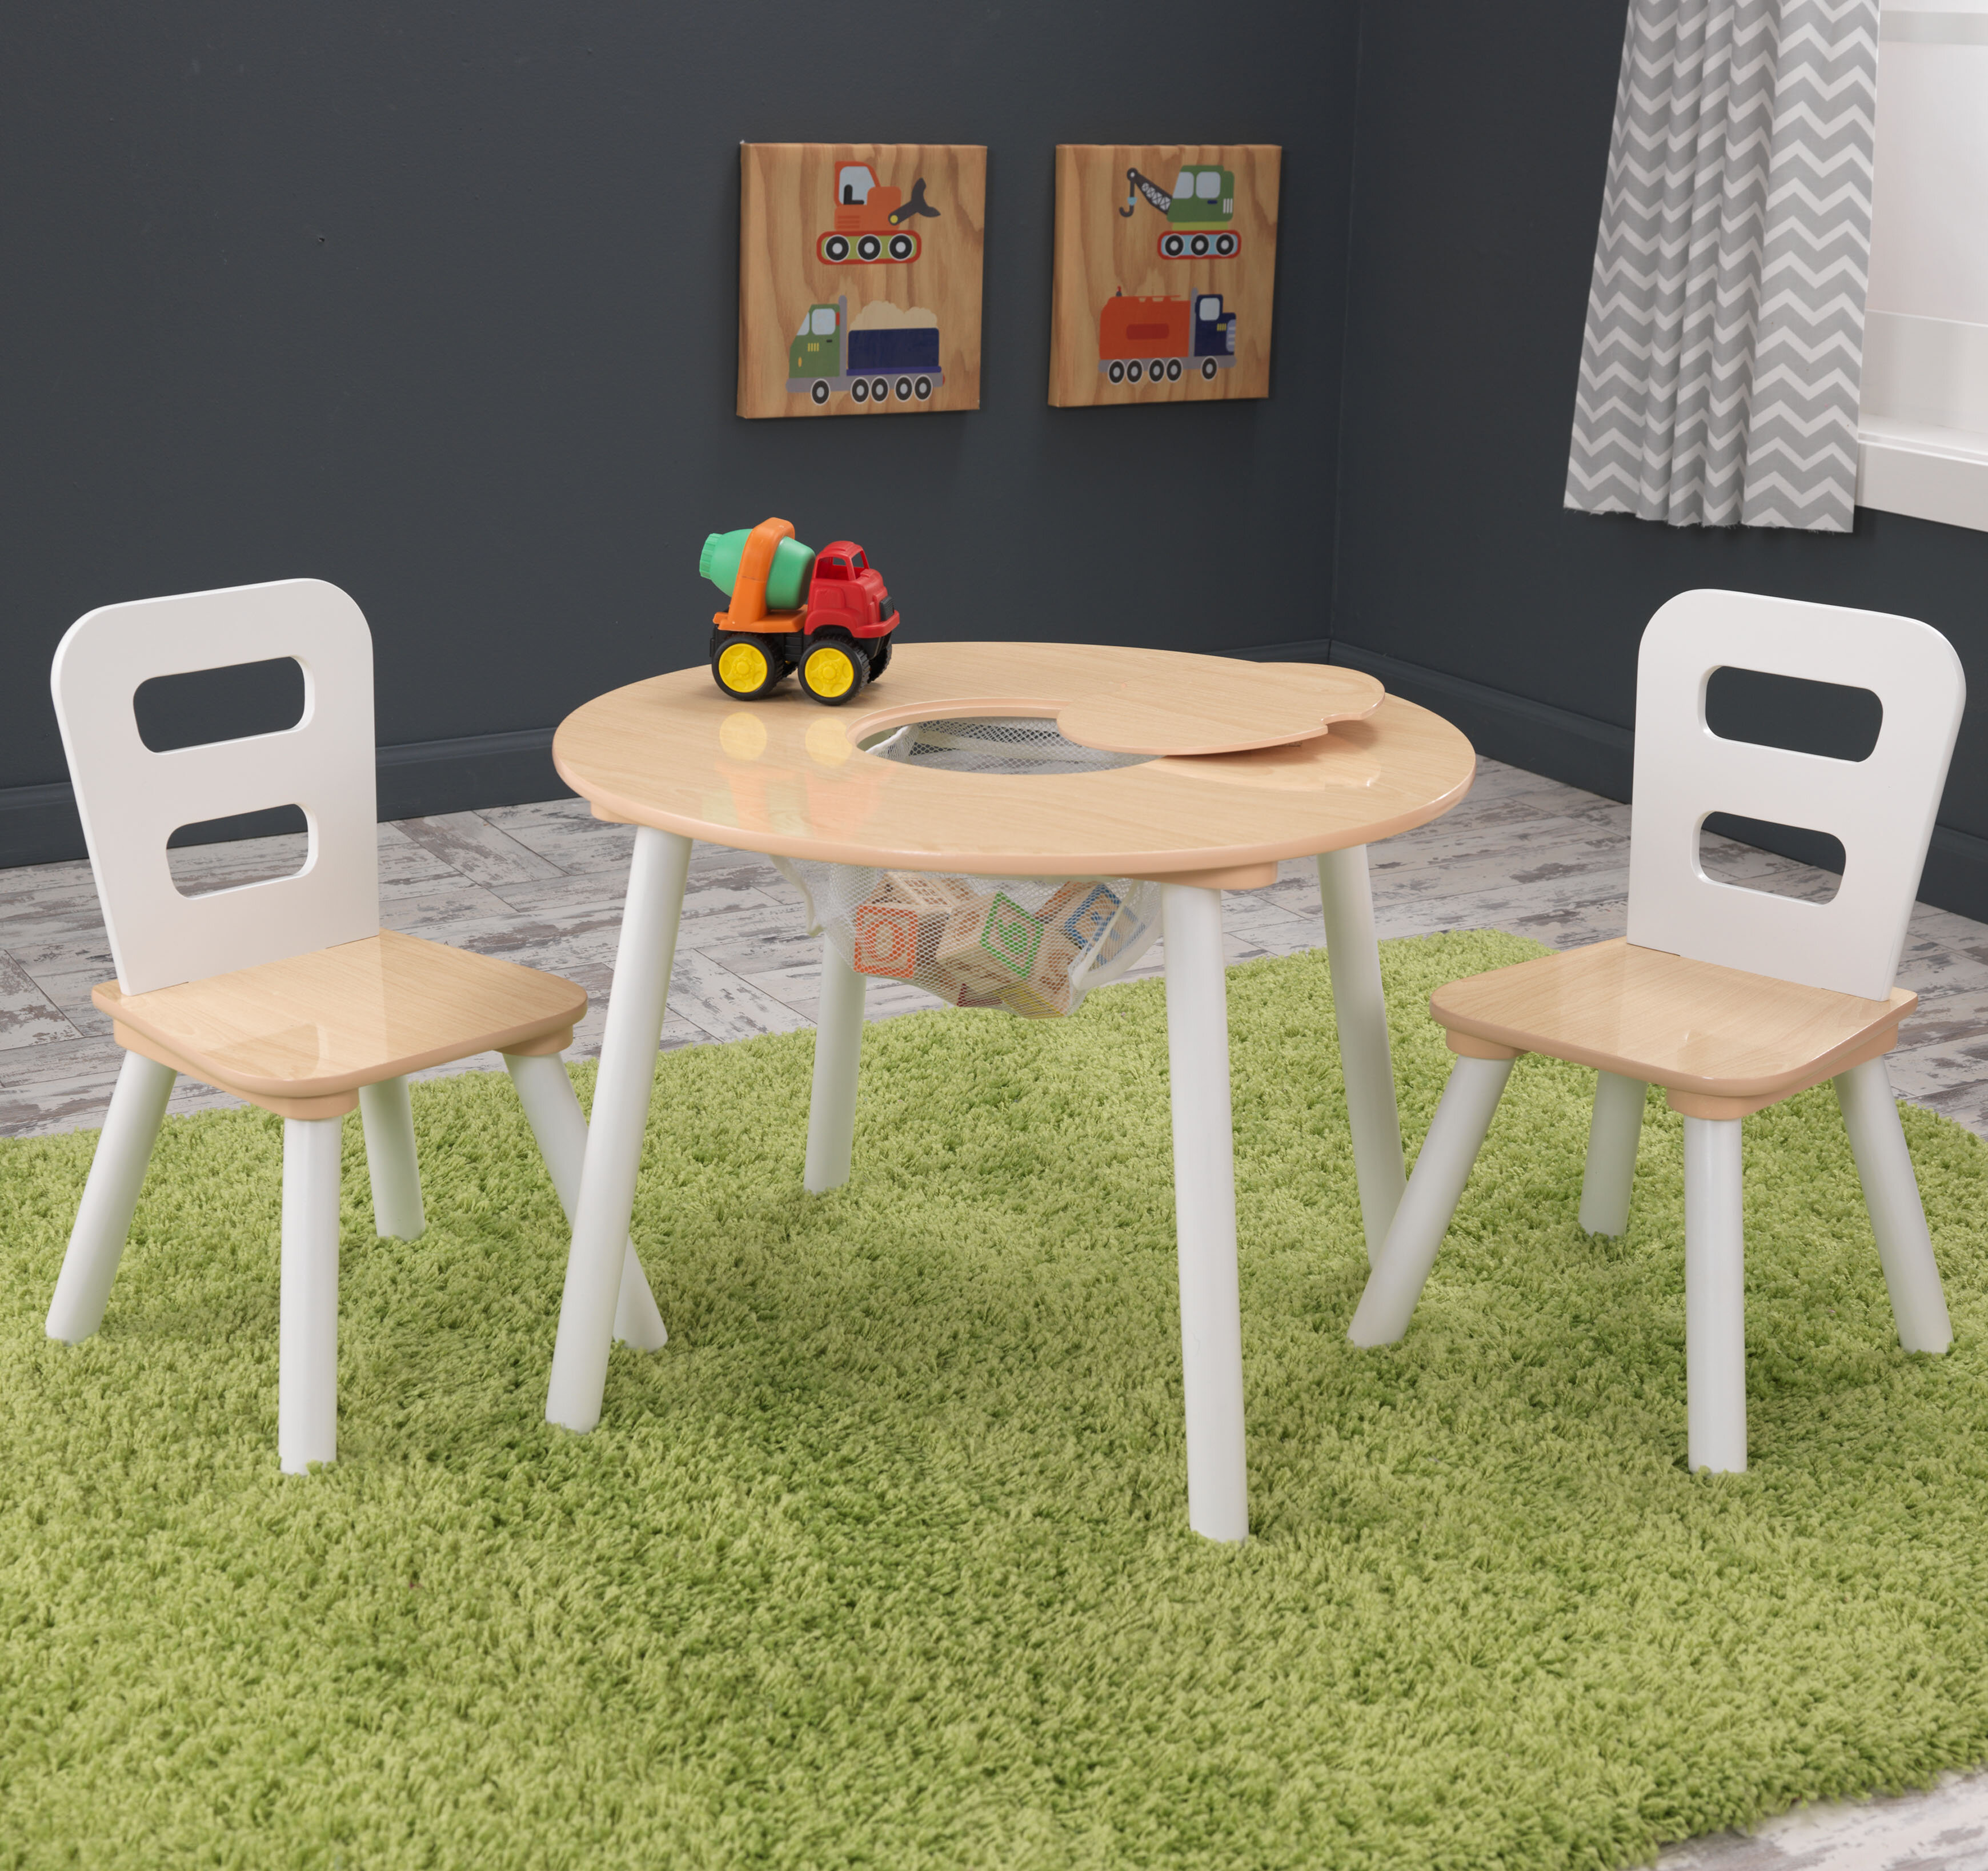 Furniture Living Room Children Wooden Table Chairs for Children Multifunction Kids Childs Studying Painting Home School Multicoloured Zerone Set of Table and 2 Chairs for Children 